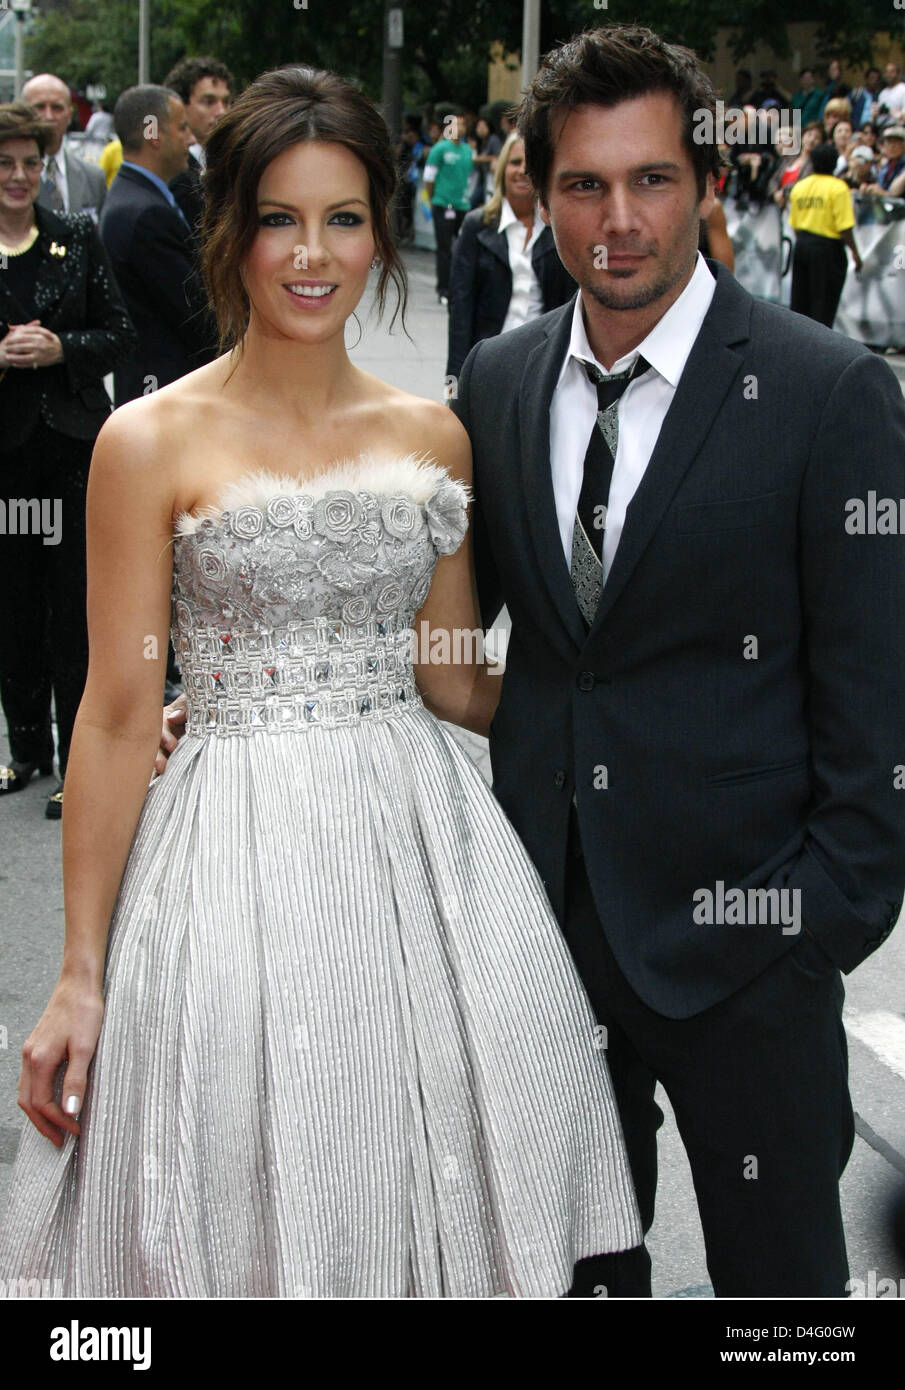 British actress Kate Beckinsale and her husband, US director Len Wiseman arrive at the premiere of the film 'Nothing But The Truth' during the 2008 Toronto International Film Festival at Visa Screening Room in Toronto, Canada, 08 September 2008. Photo: Hubert Boesl Stock Photo